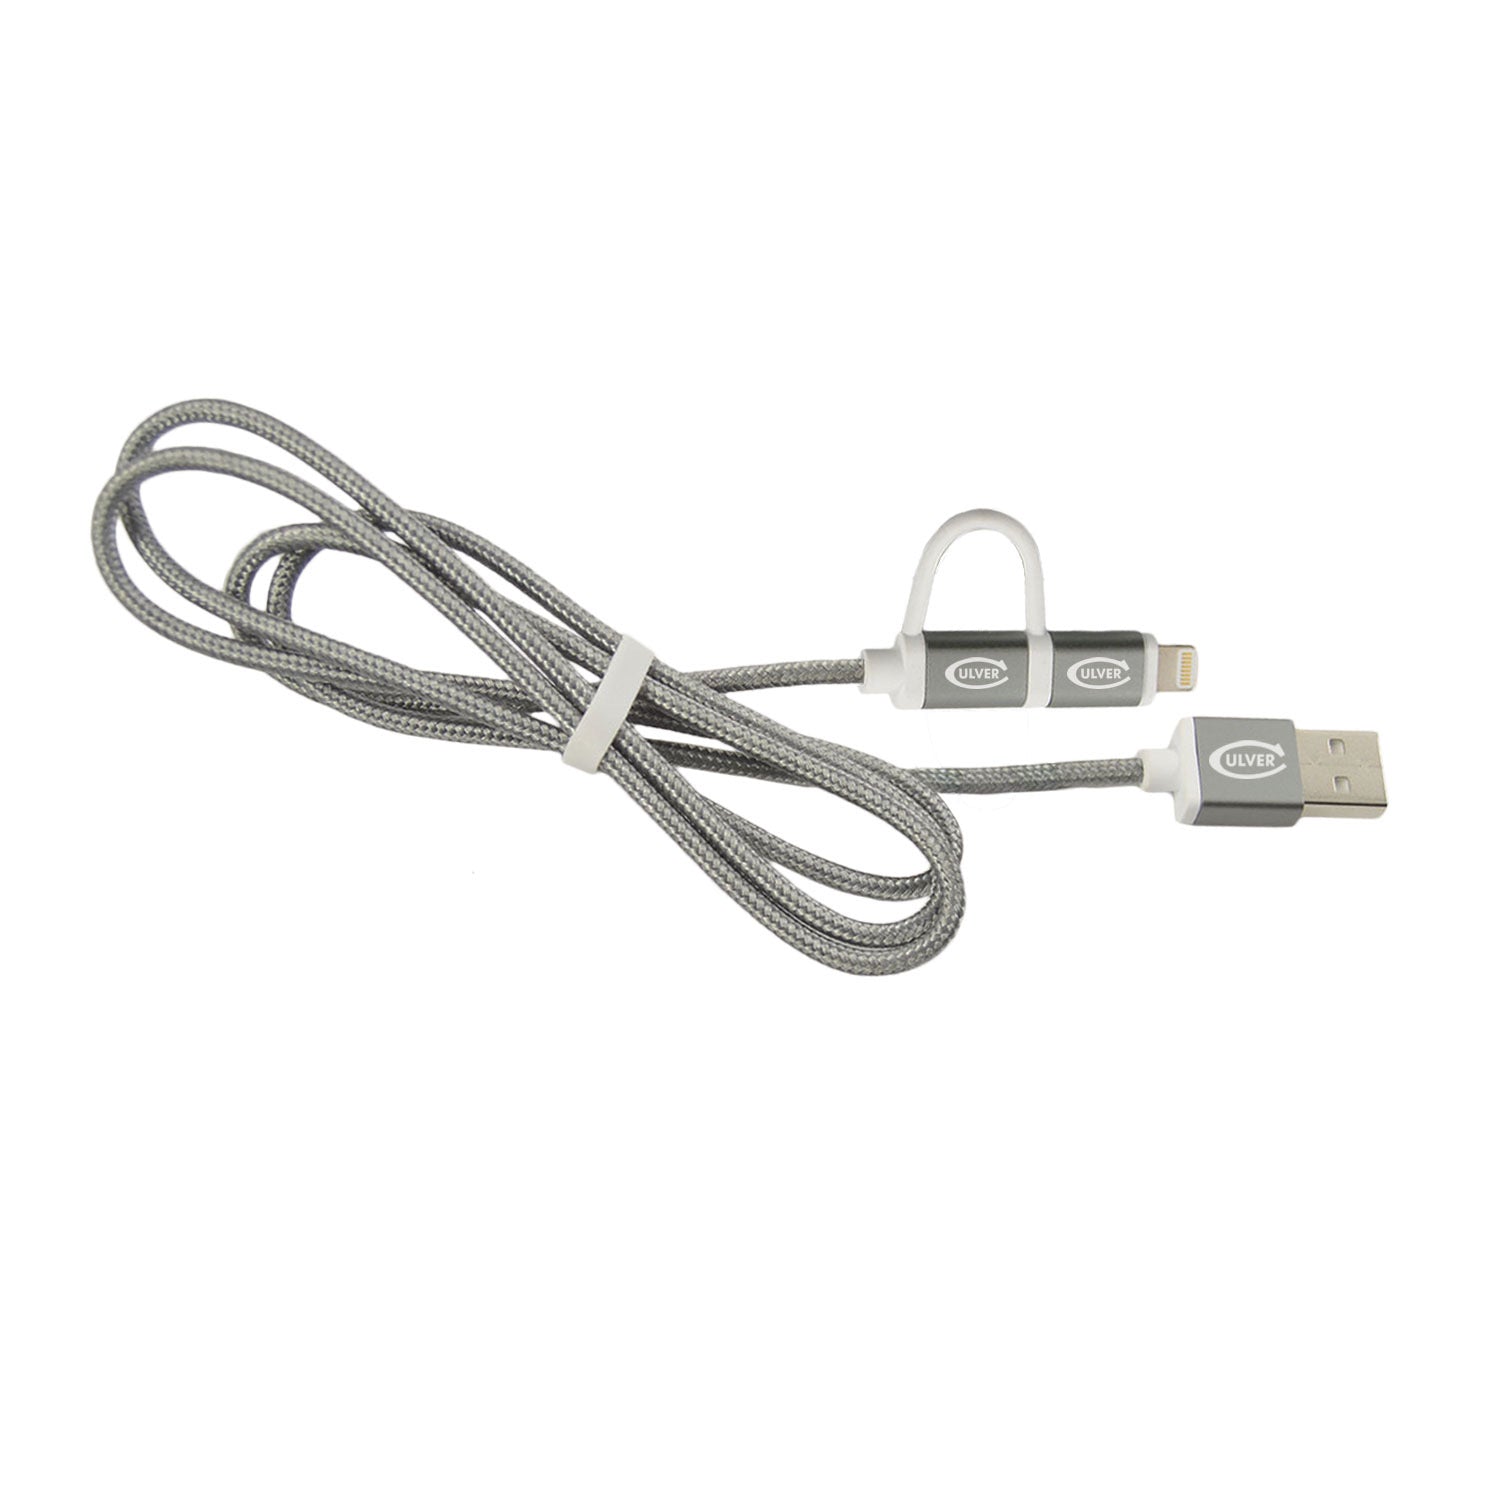 Culver 2 In 1 Charging Cable